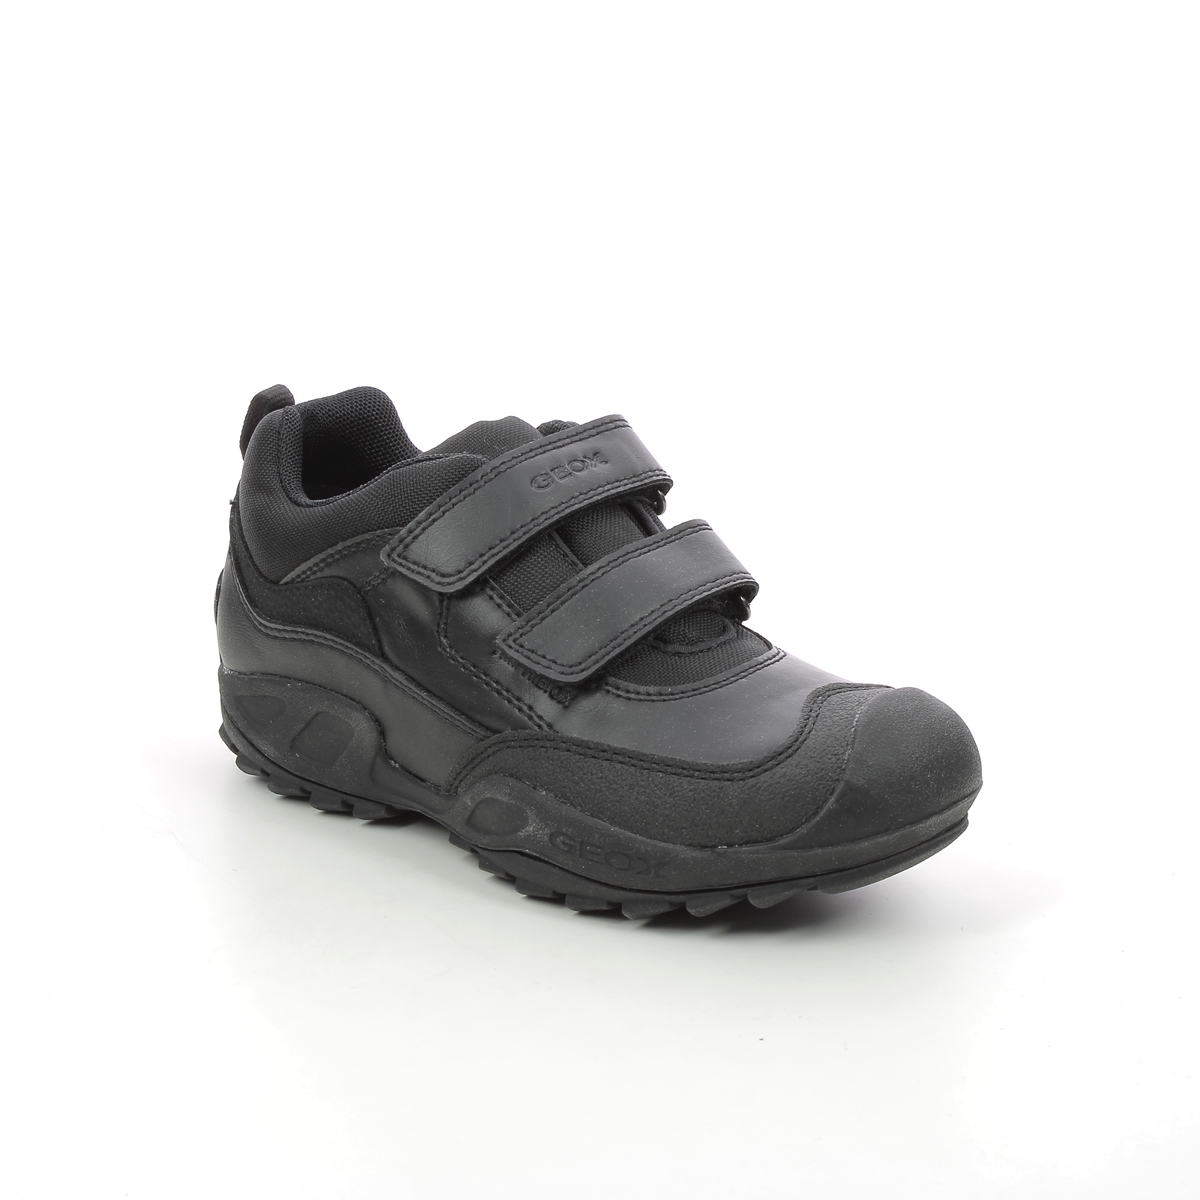 Geox - New Savage Tex (Black) J841Wb-C9999 In Size 36 In Plain Black For School For kids